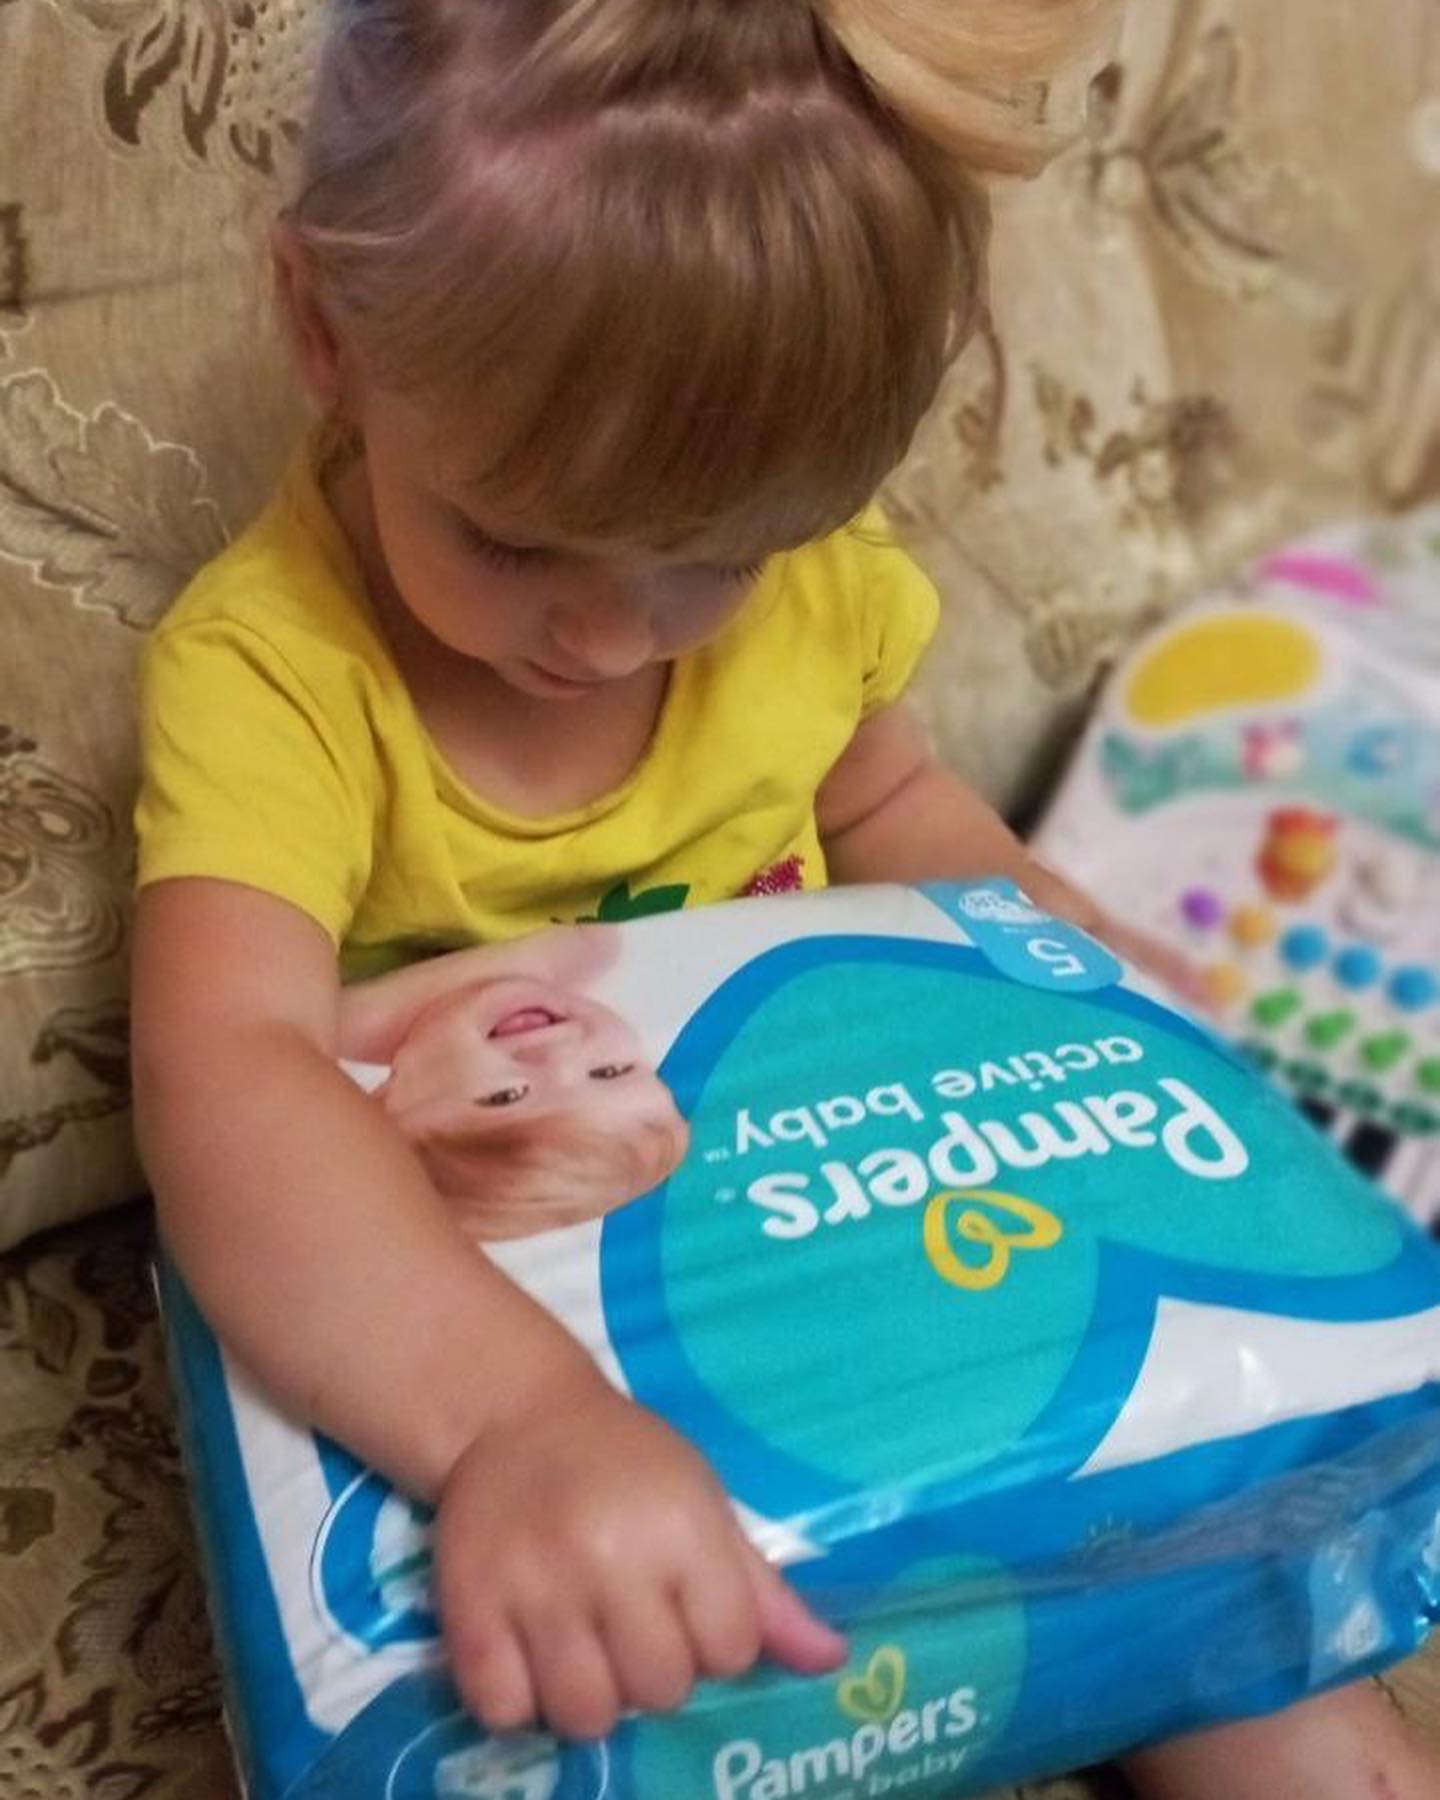 A little girl playing with a pack of pampers diapers.